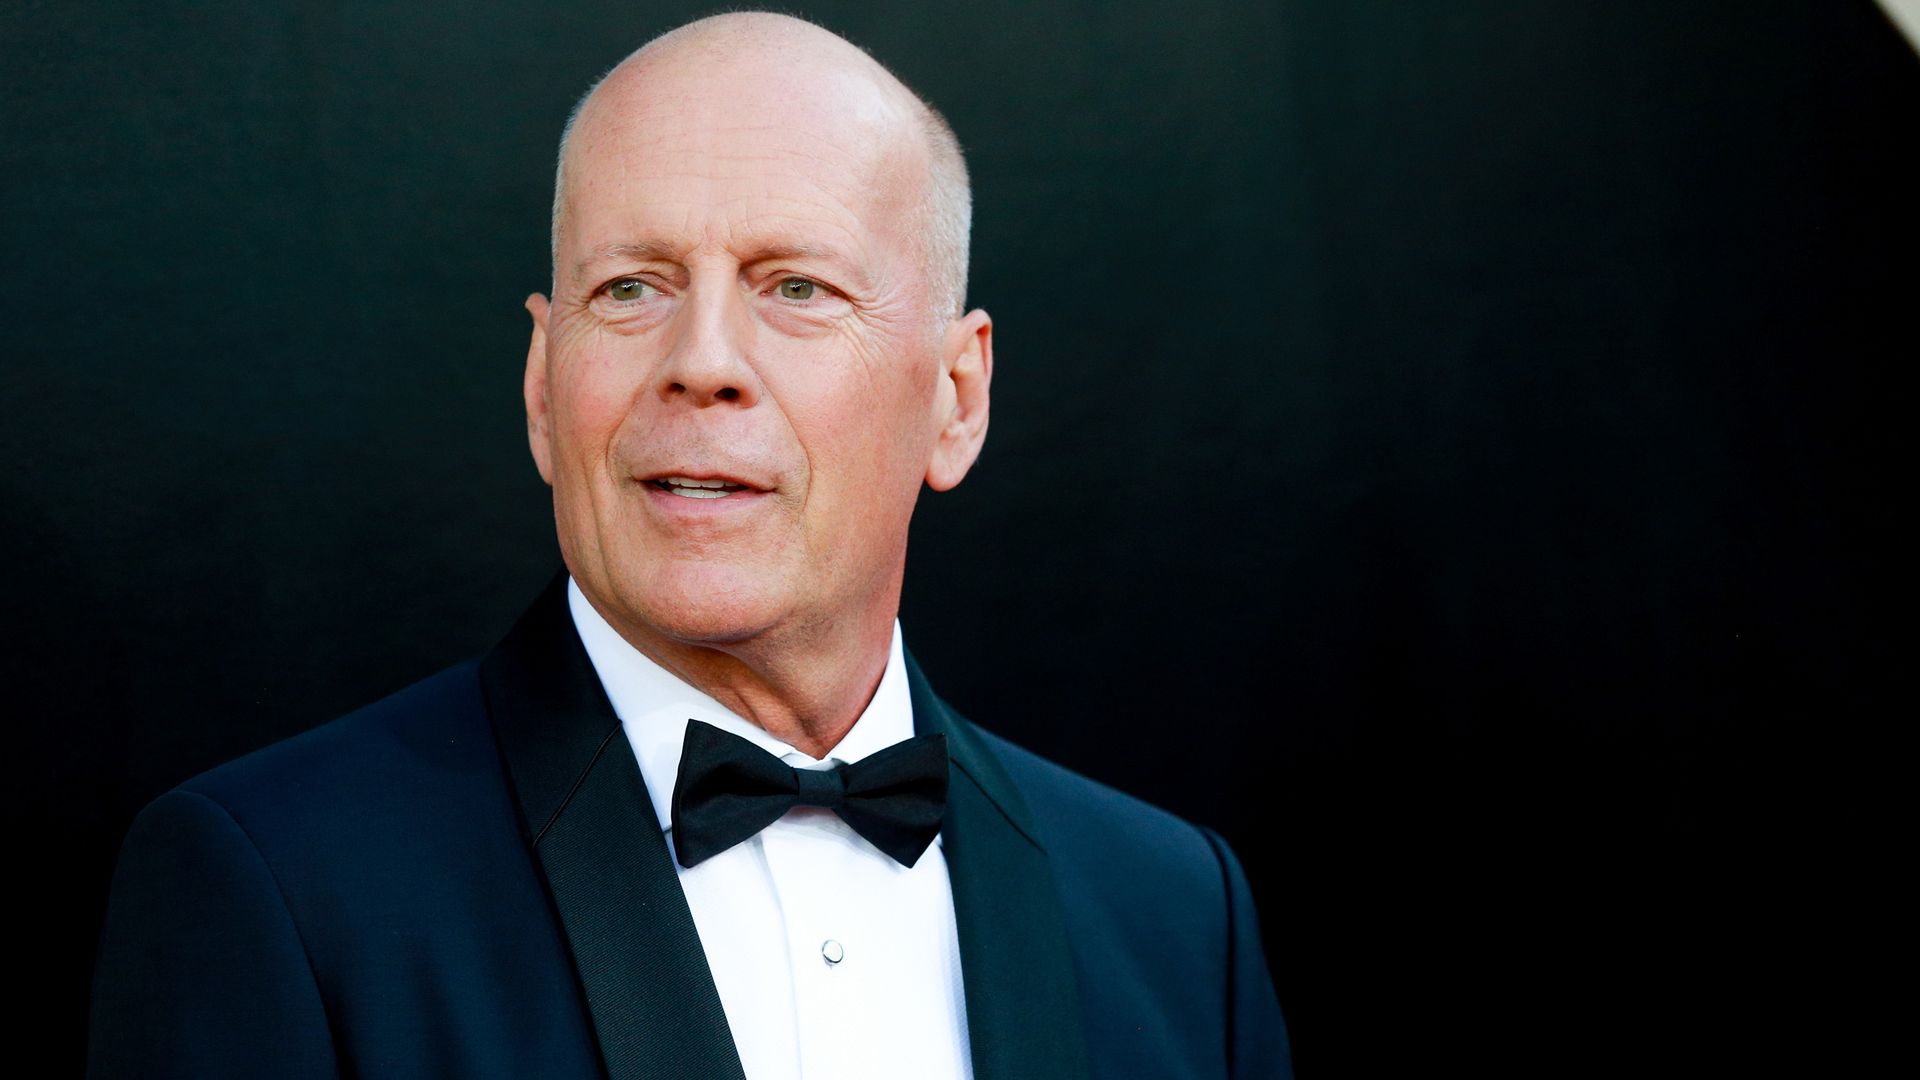  Bruce Willis at a Comedy Central event in 2018.